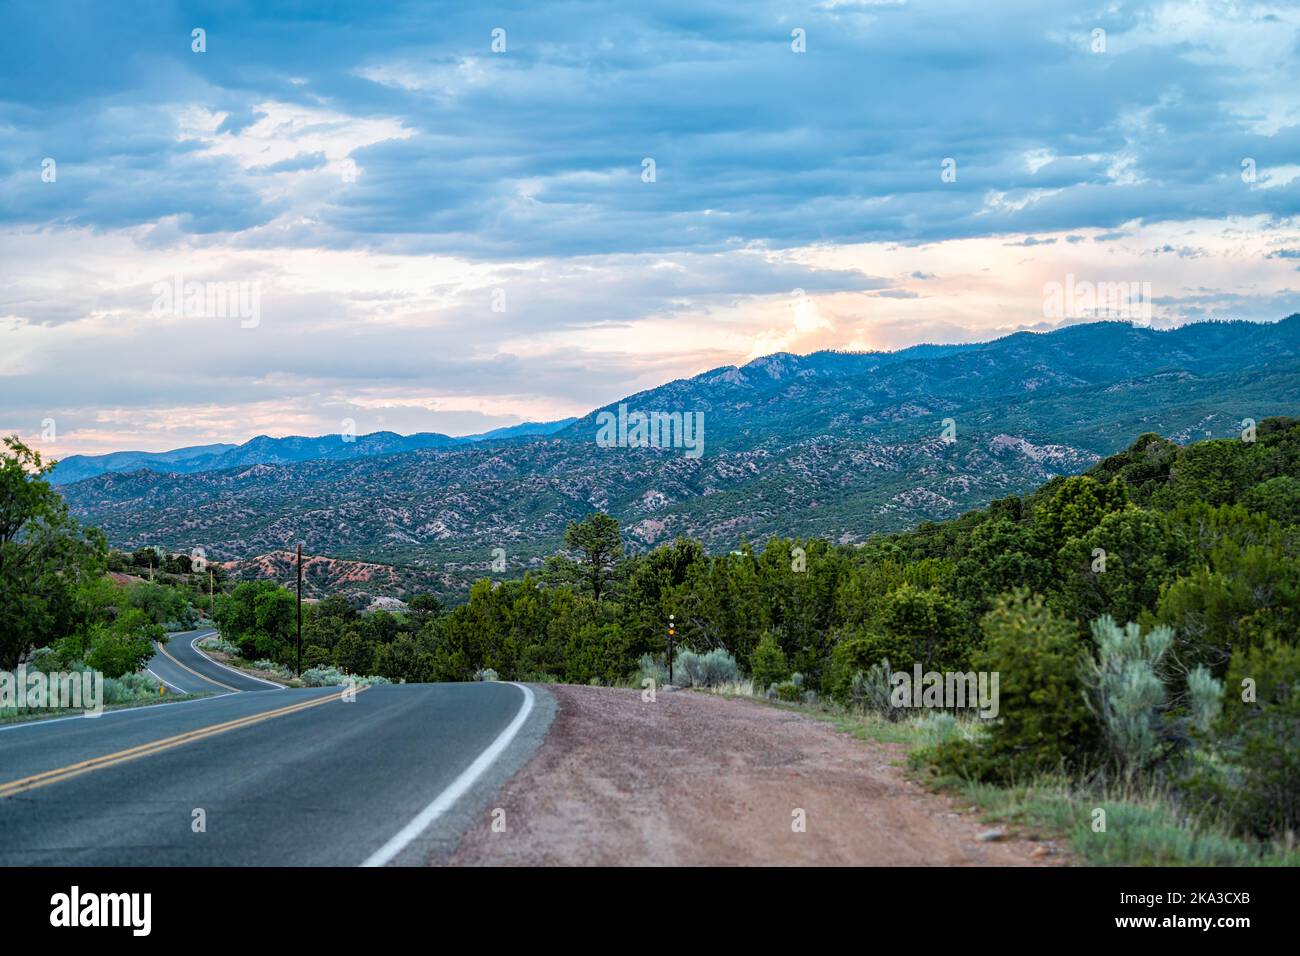 Sangre De Cristo mountains sunset on Bishops Lodge Road street in Santa Fe, New Mexico with pink sunlight by Tesuque residential community Stock Photo